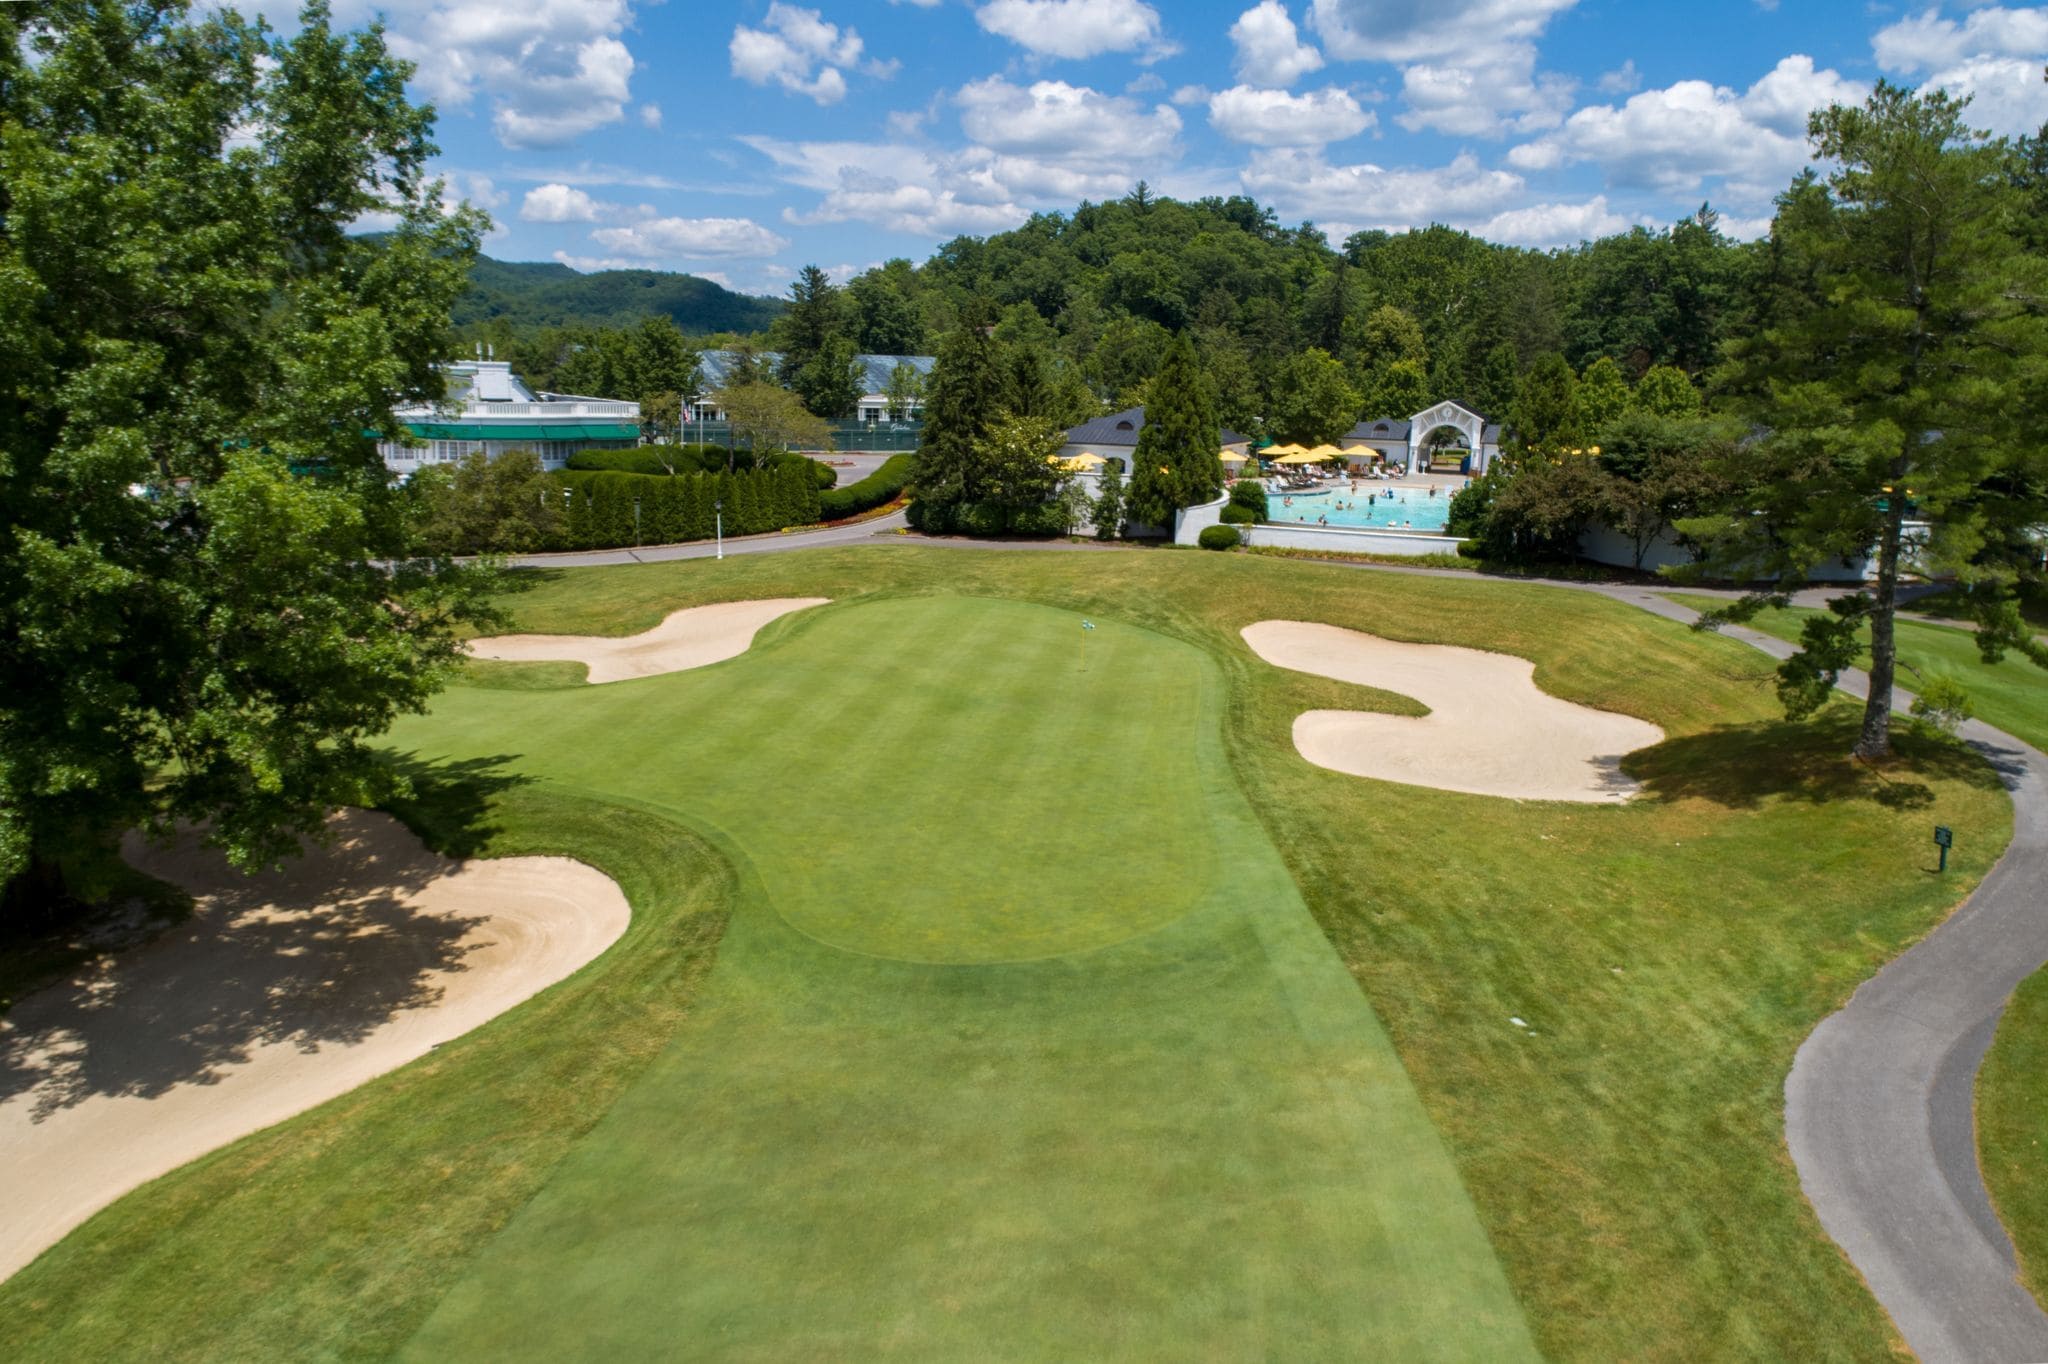 Greenbrier course